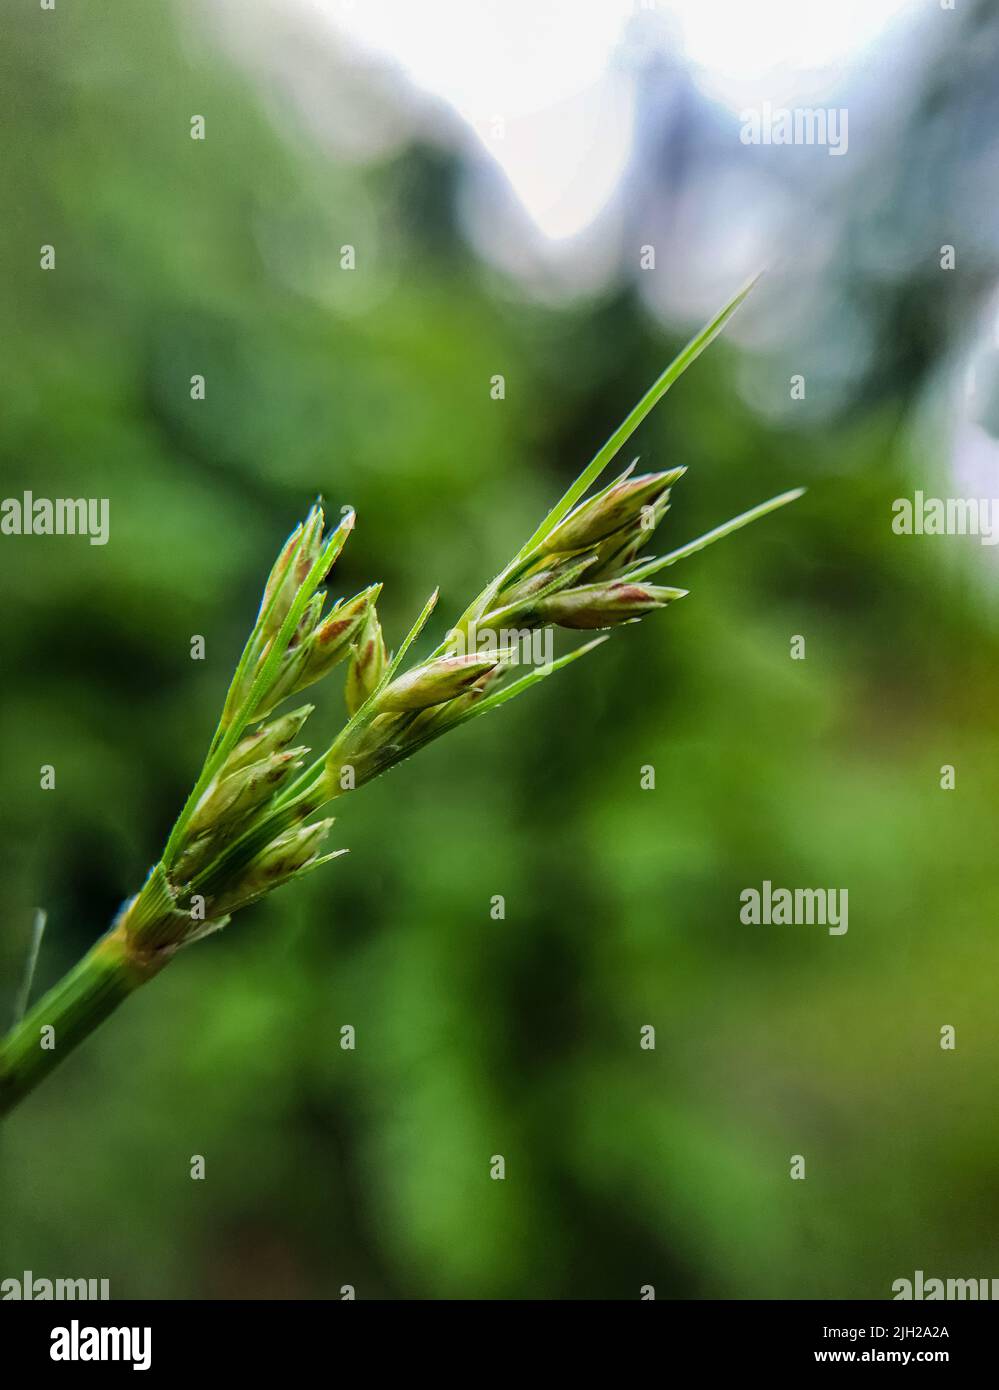 A closeup of scleria plant on a green leafy background Stock Photo